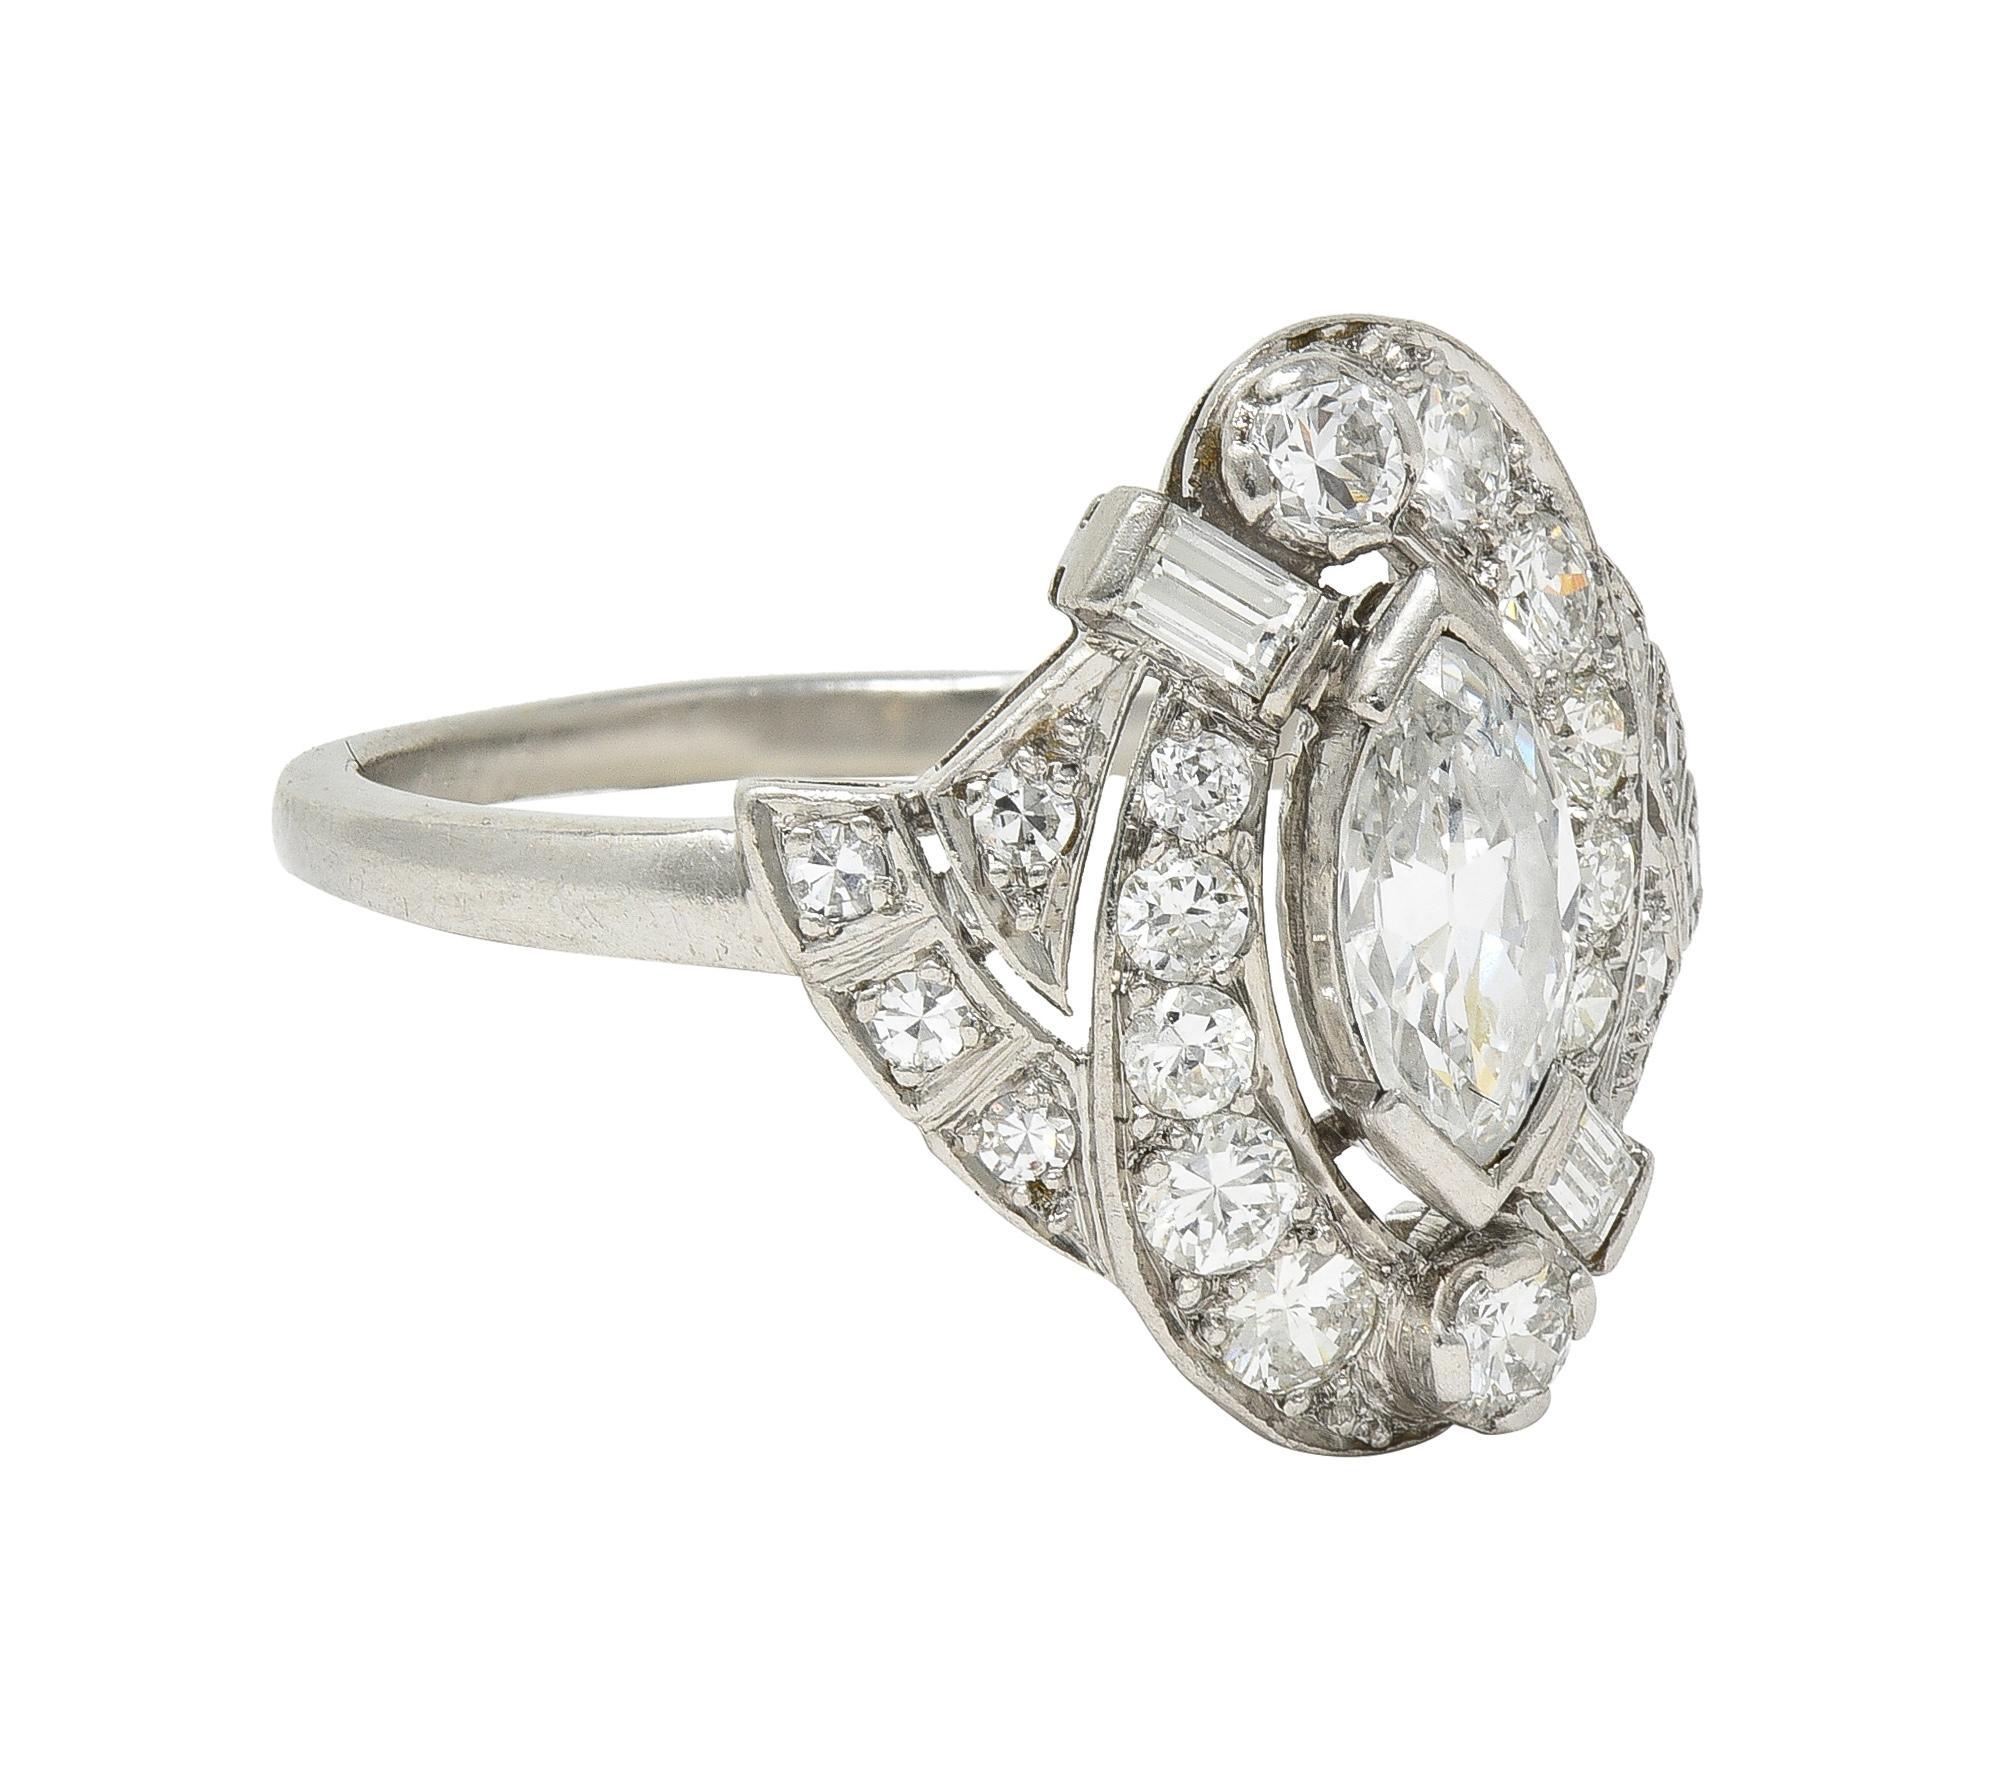 Centering a marquise cut diamond weighing approximately 0.72 carat - H color with VS2 clarity
Tab set with a recessed pierced swirl motif surround bead and bar set with diamonds
Transitional, single, and baguette cut 0- weighing approximately 0.54